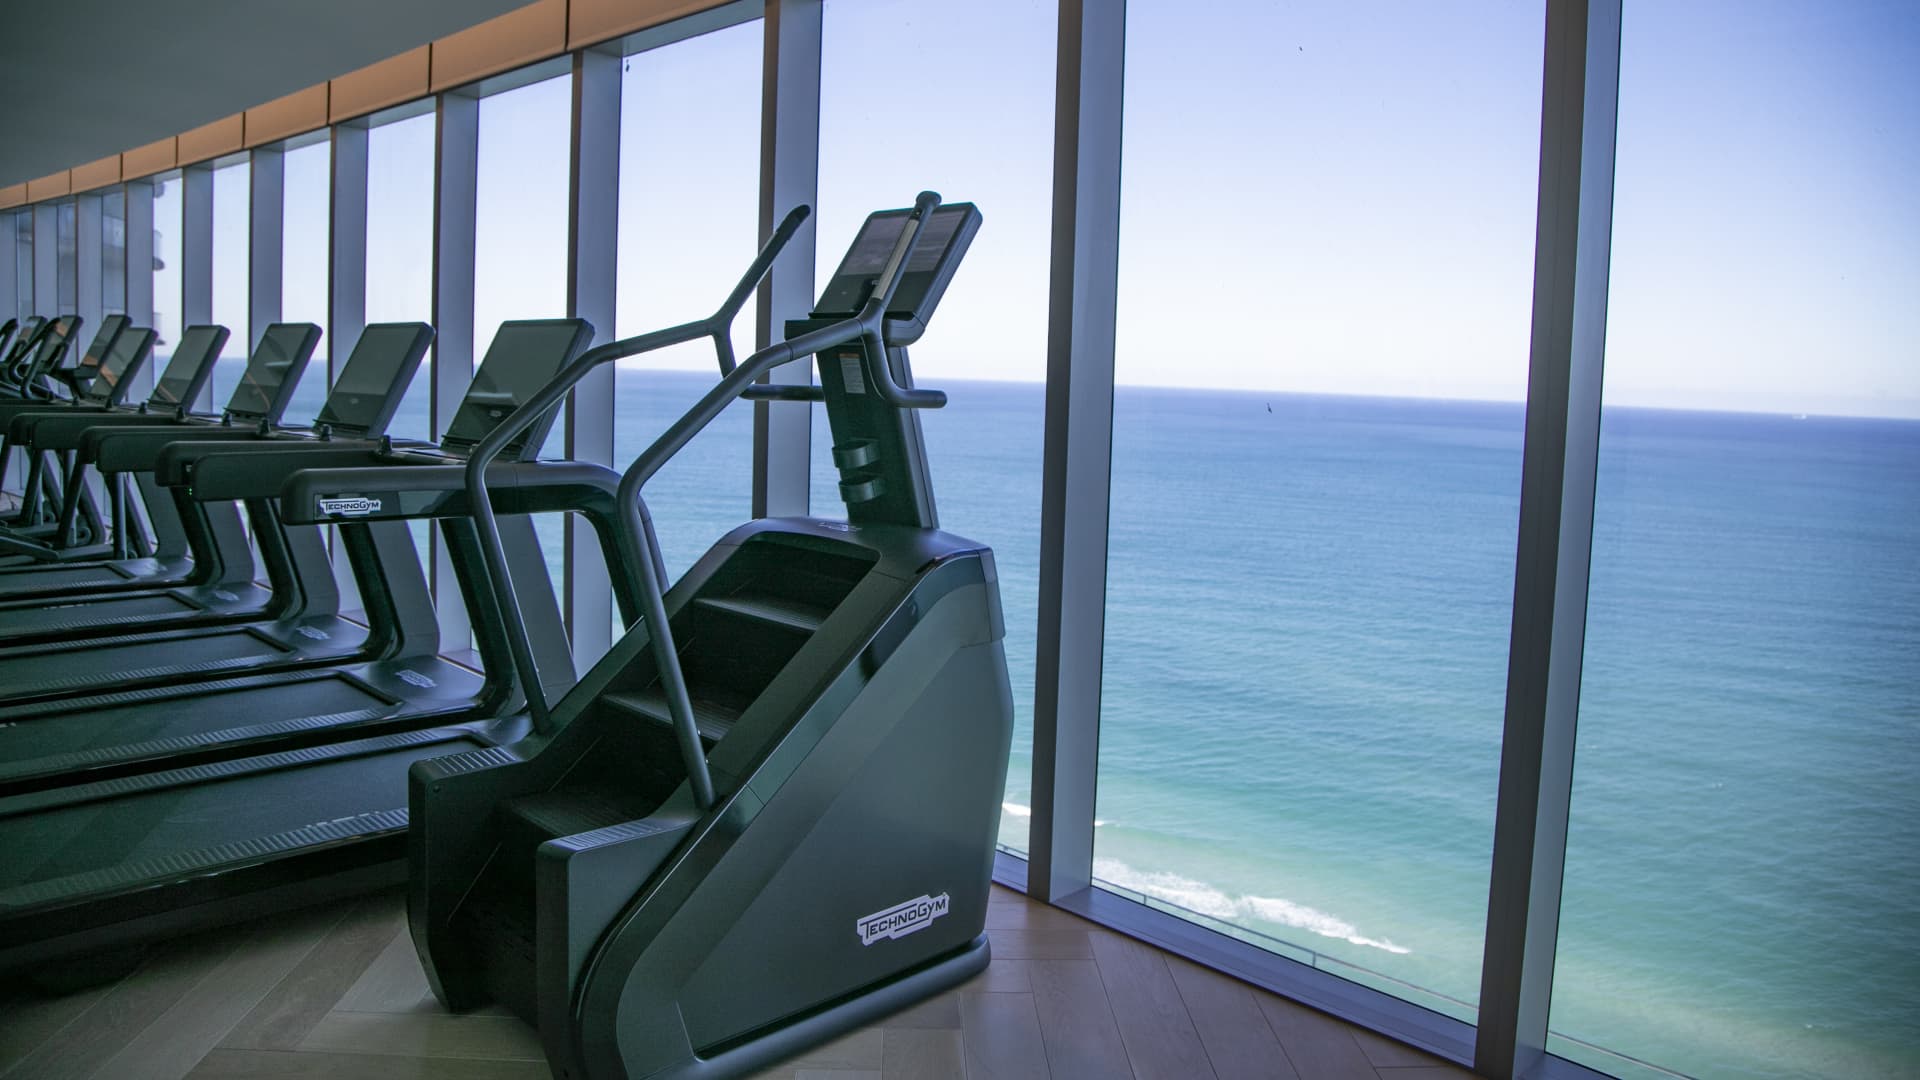 Inside the Sky Club's fitness center where the treadmills come with impressive views.